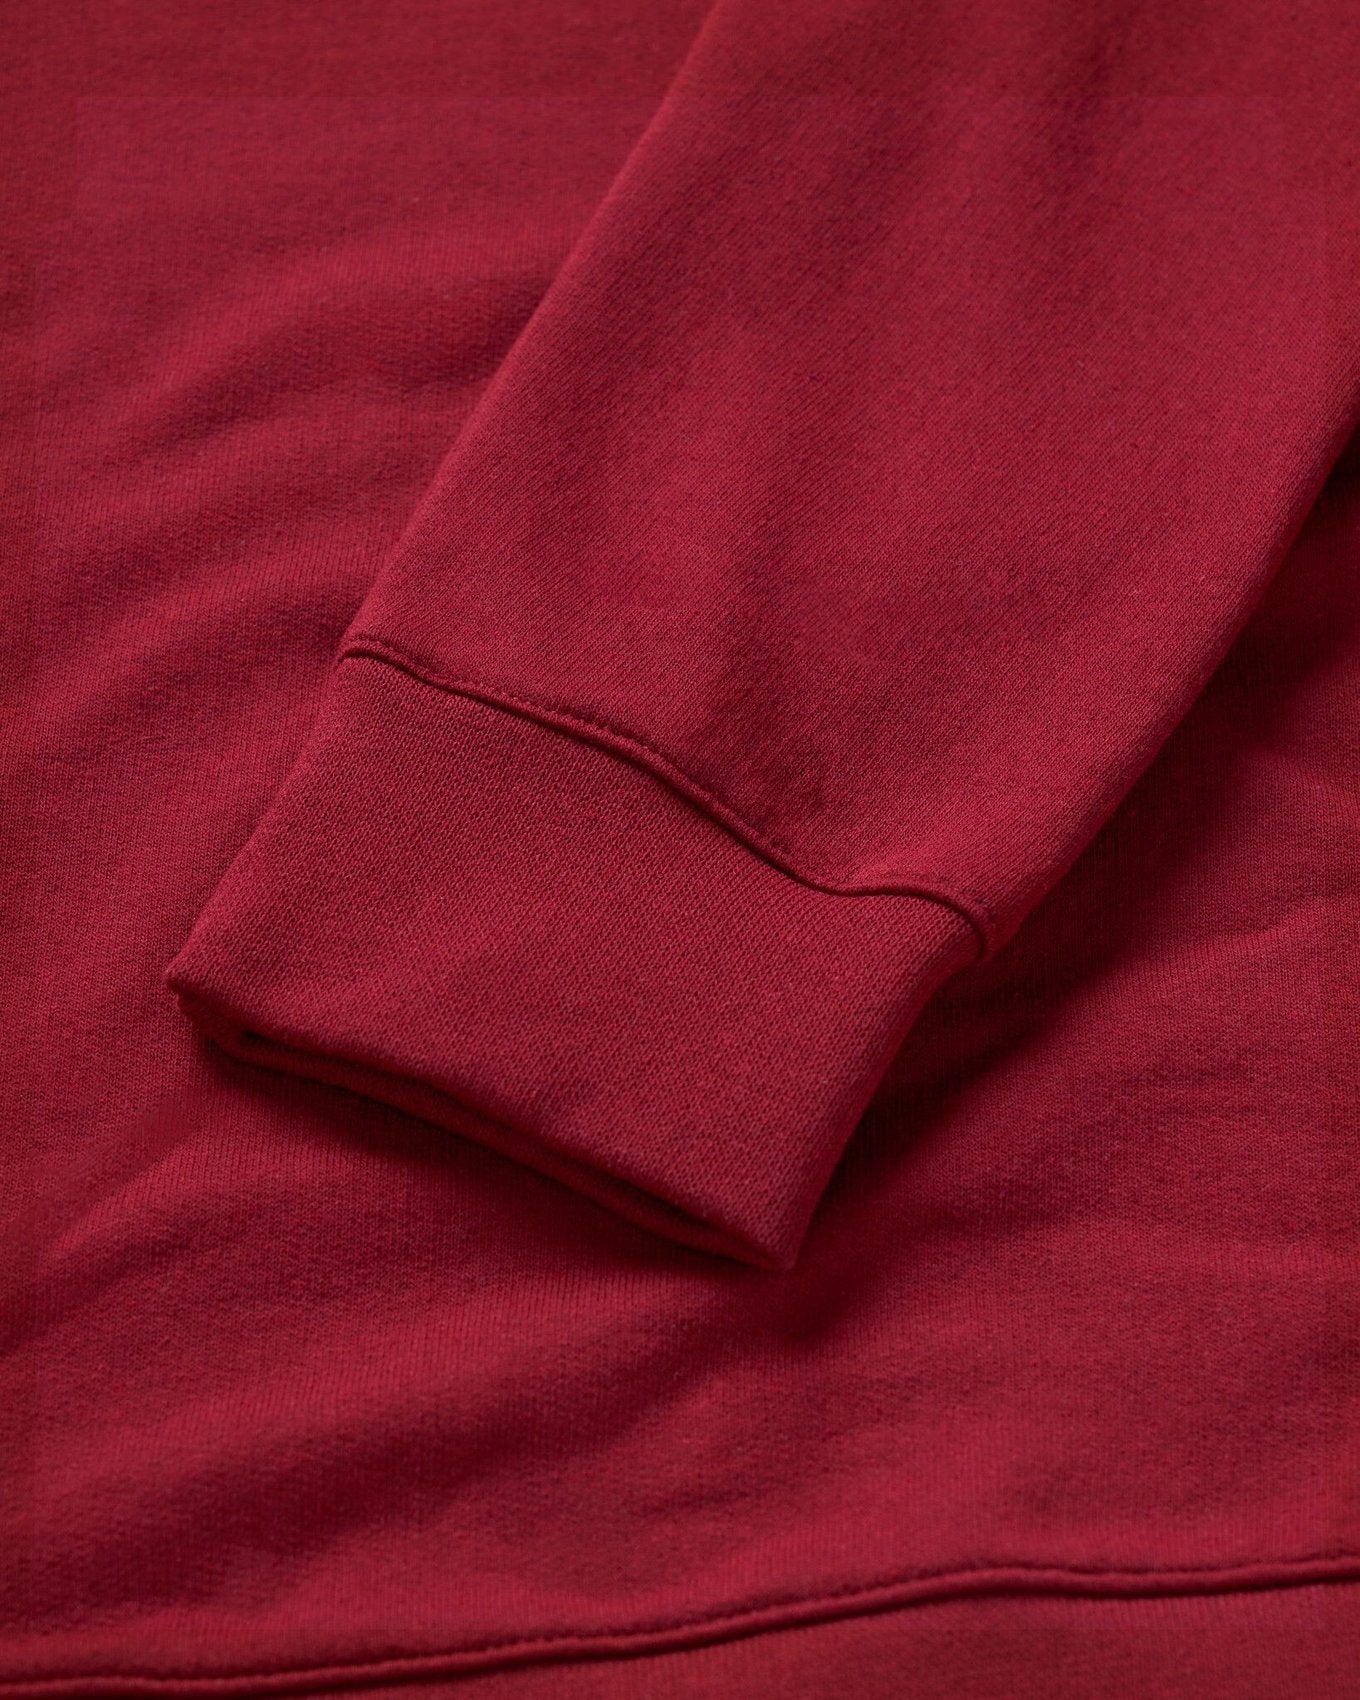 ReApparel Embrace Crew Neck . in color Garnet and shape long sleeve